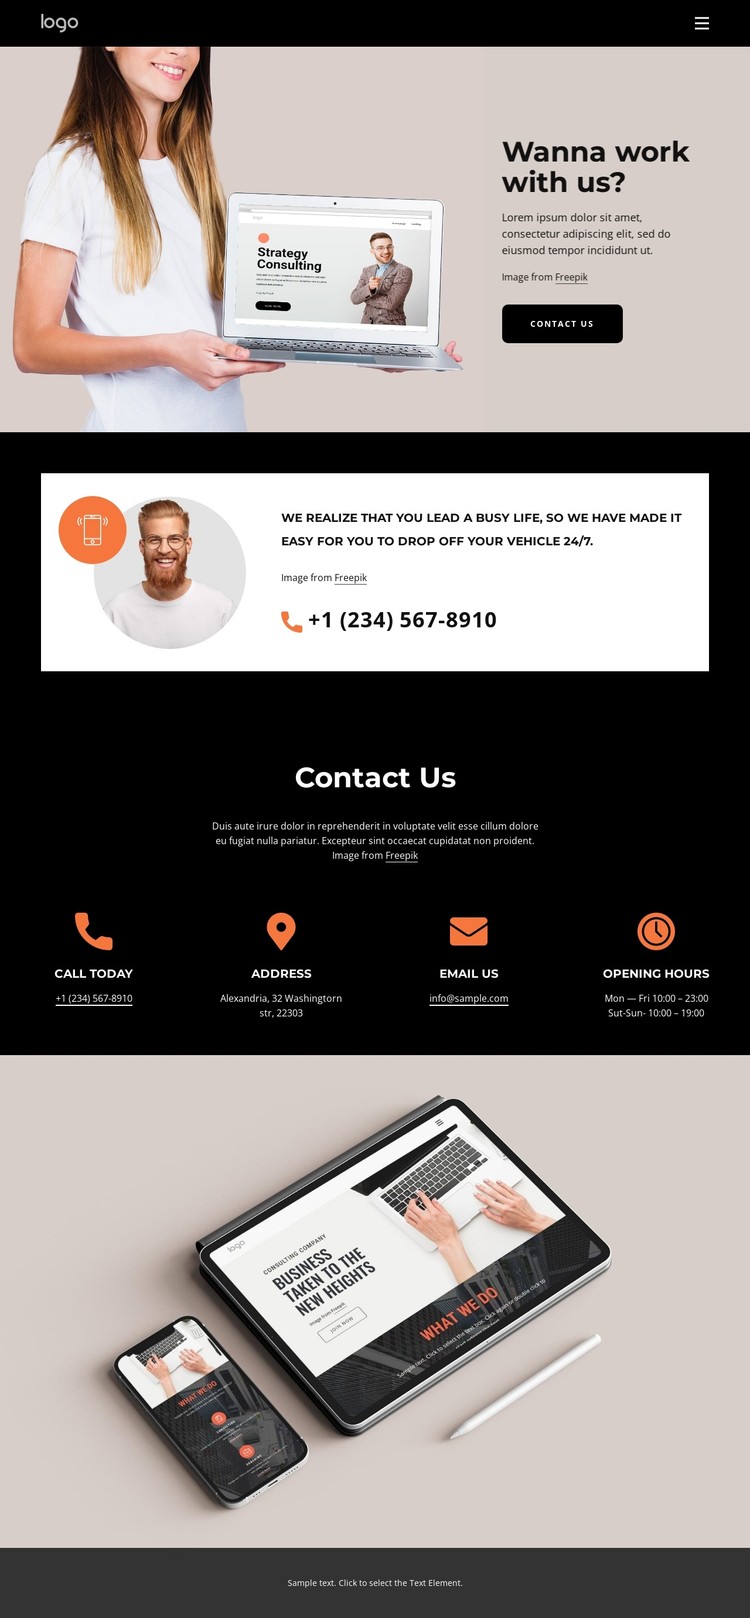 It started with honesty, passion and innovation CSS Template